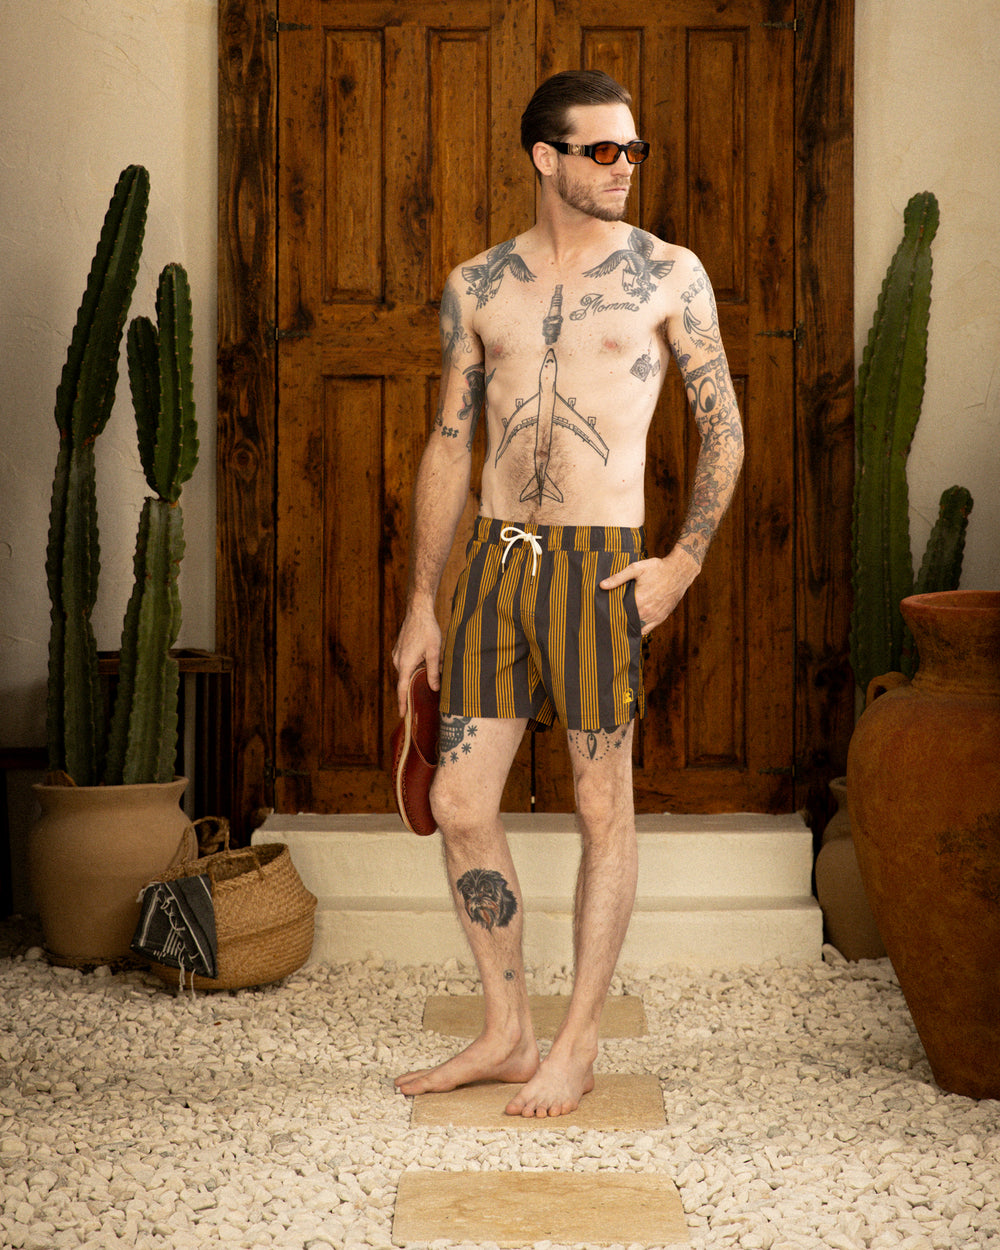 A man wearing Dandy Del Mar swim shorts with an elastic waist, standing in front of a cactus.